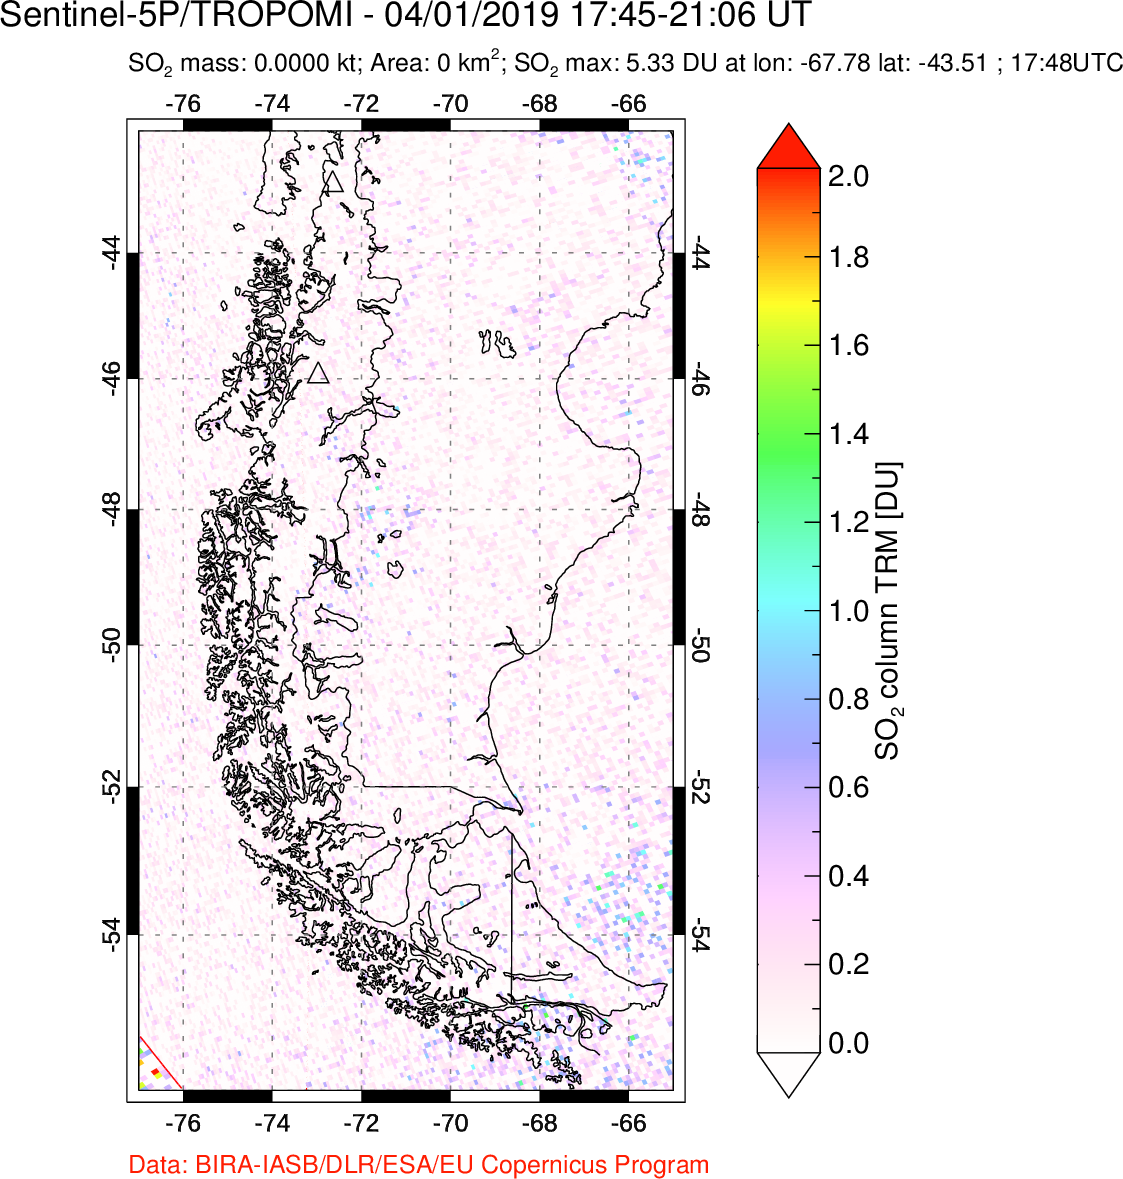 A sulfur dioxide image over Southern Chile on Apr 01, 2019.